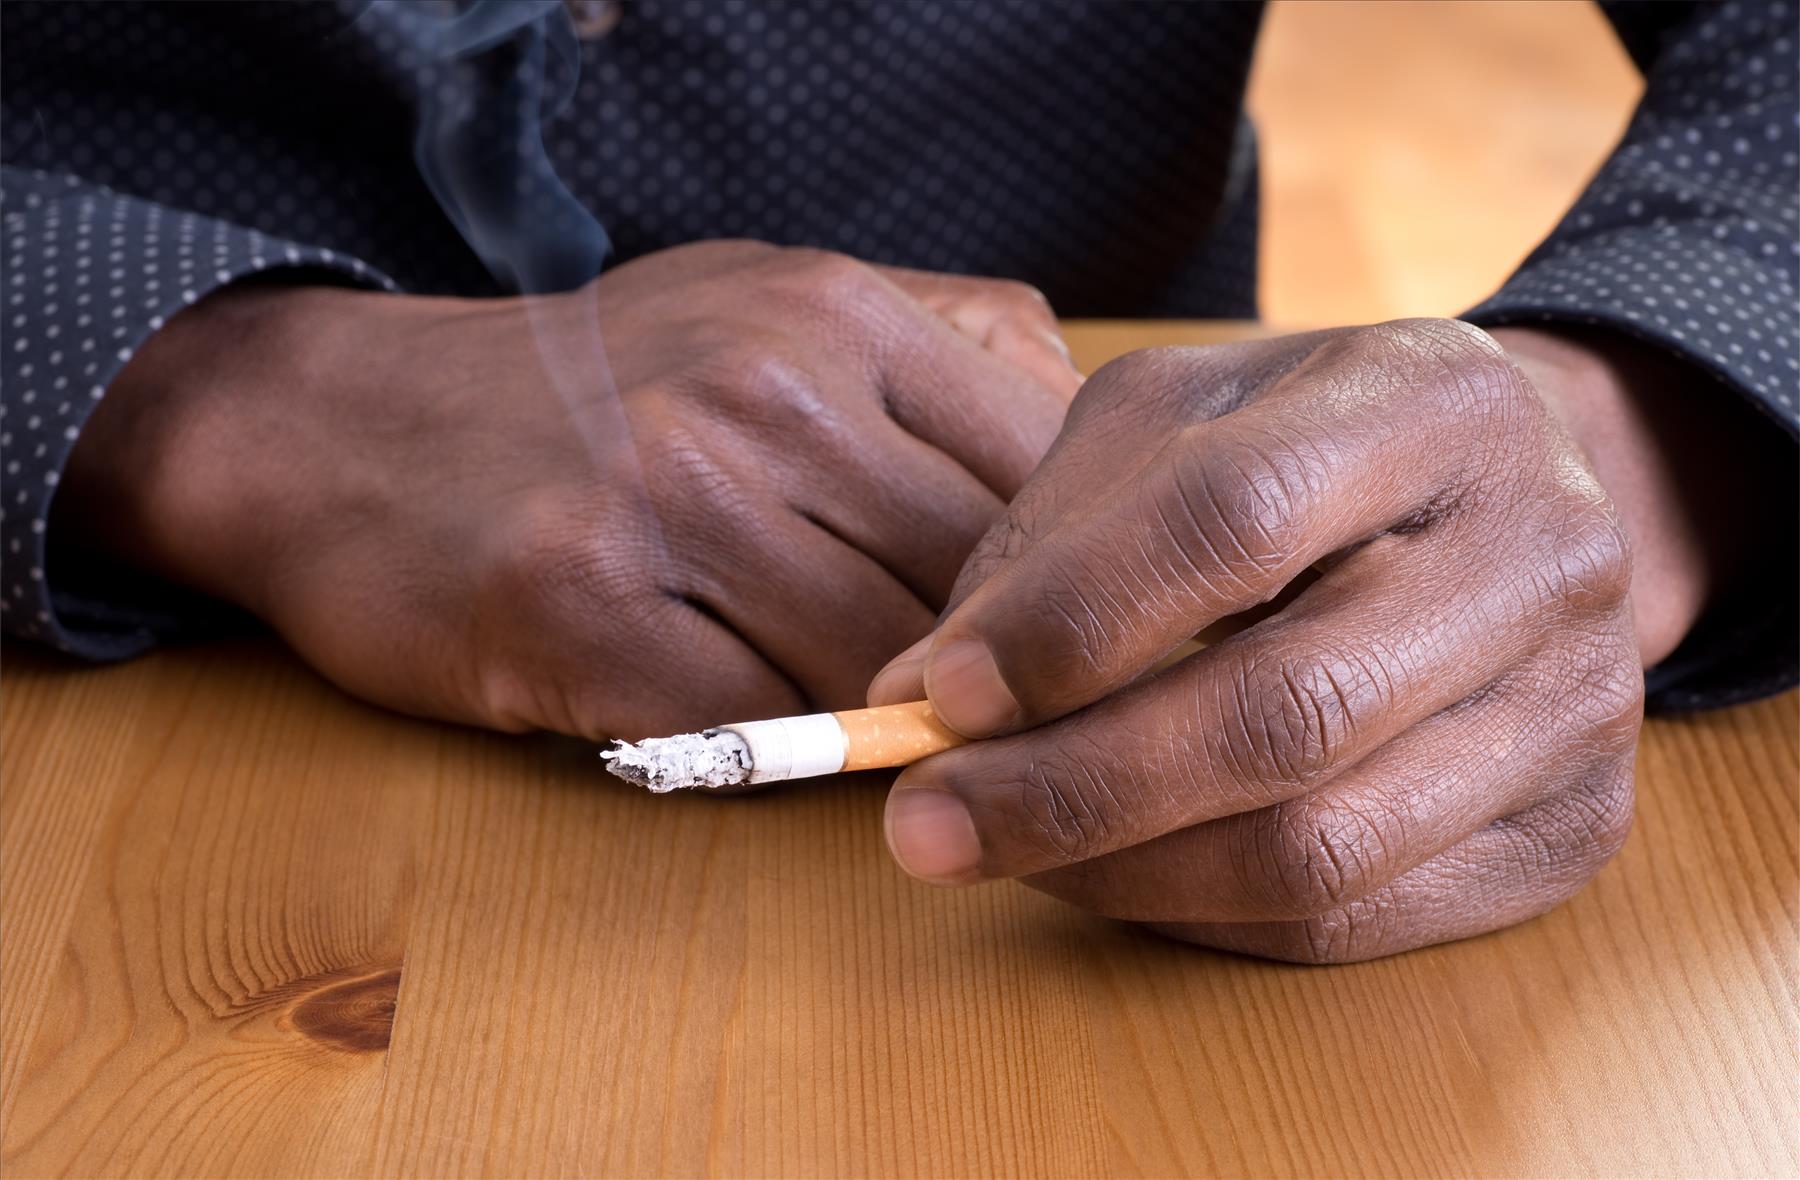 Uganda’s Tobacco Control Act comes into force on 19th of May 2016